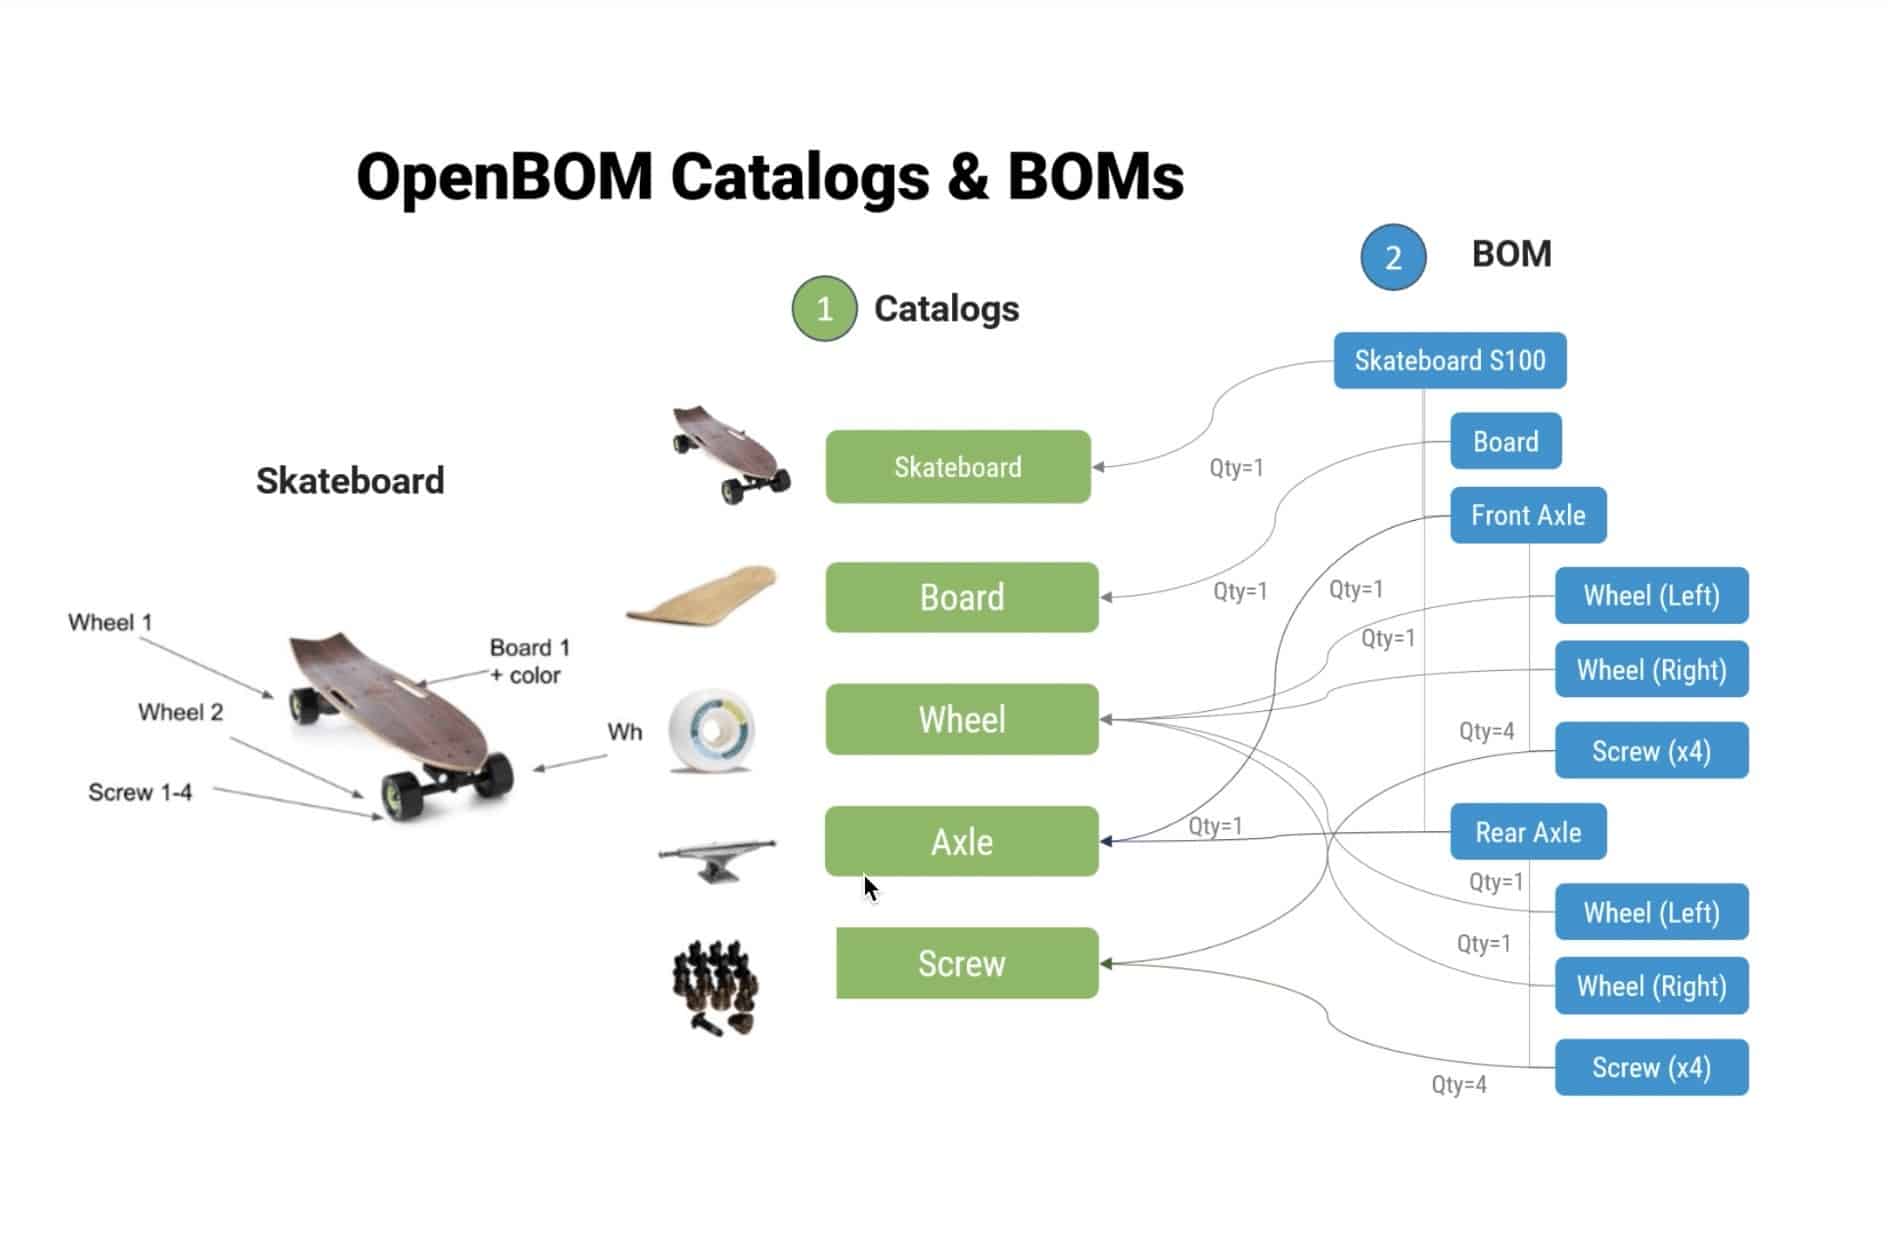 OpenBOM catalogs and BOMs